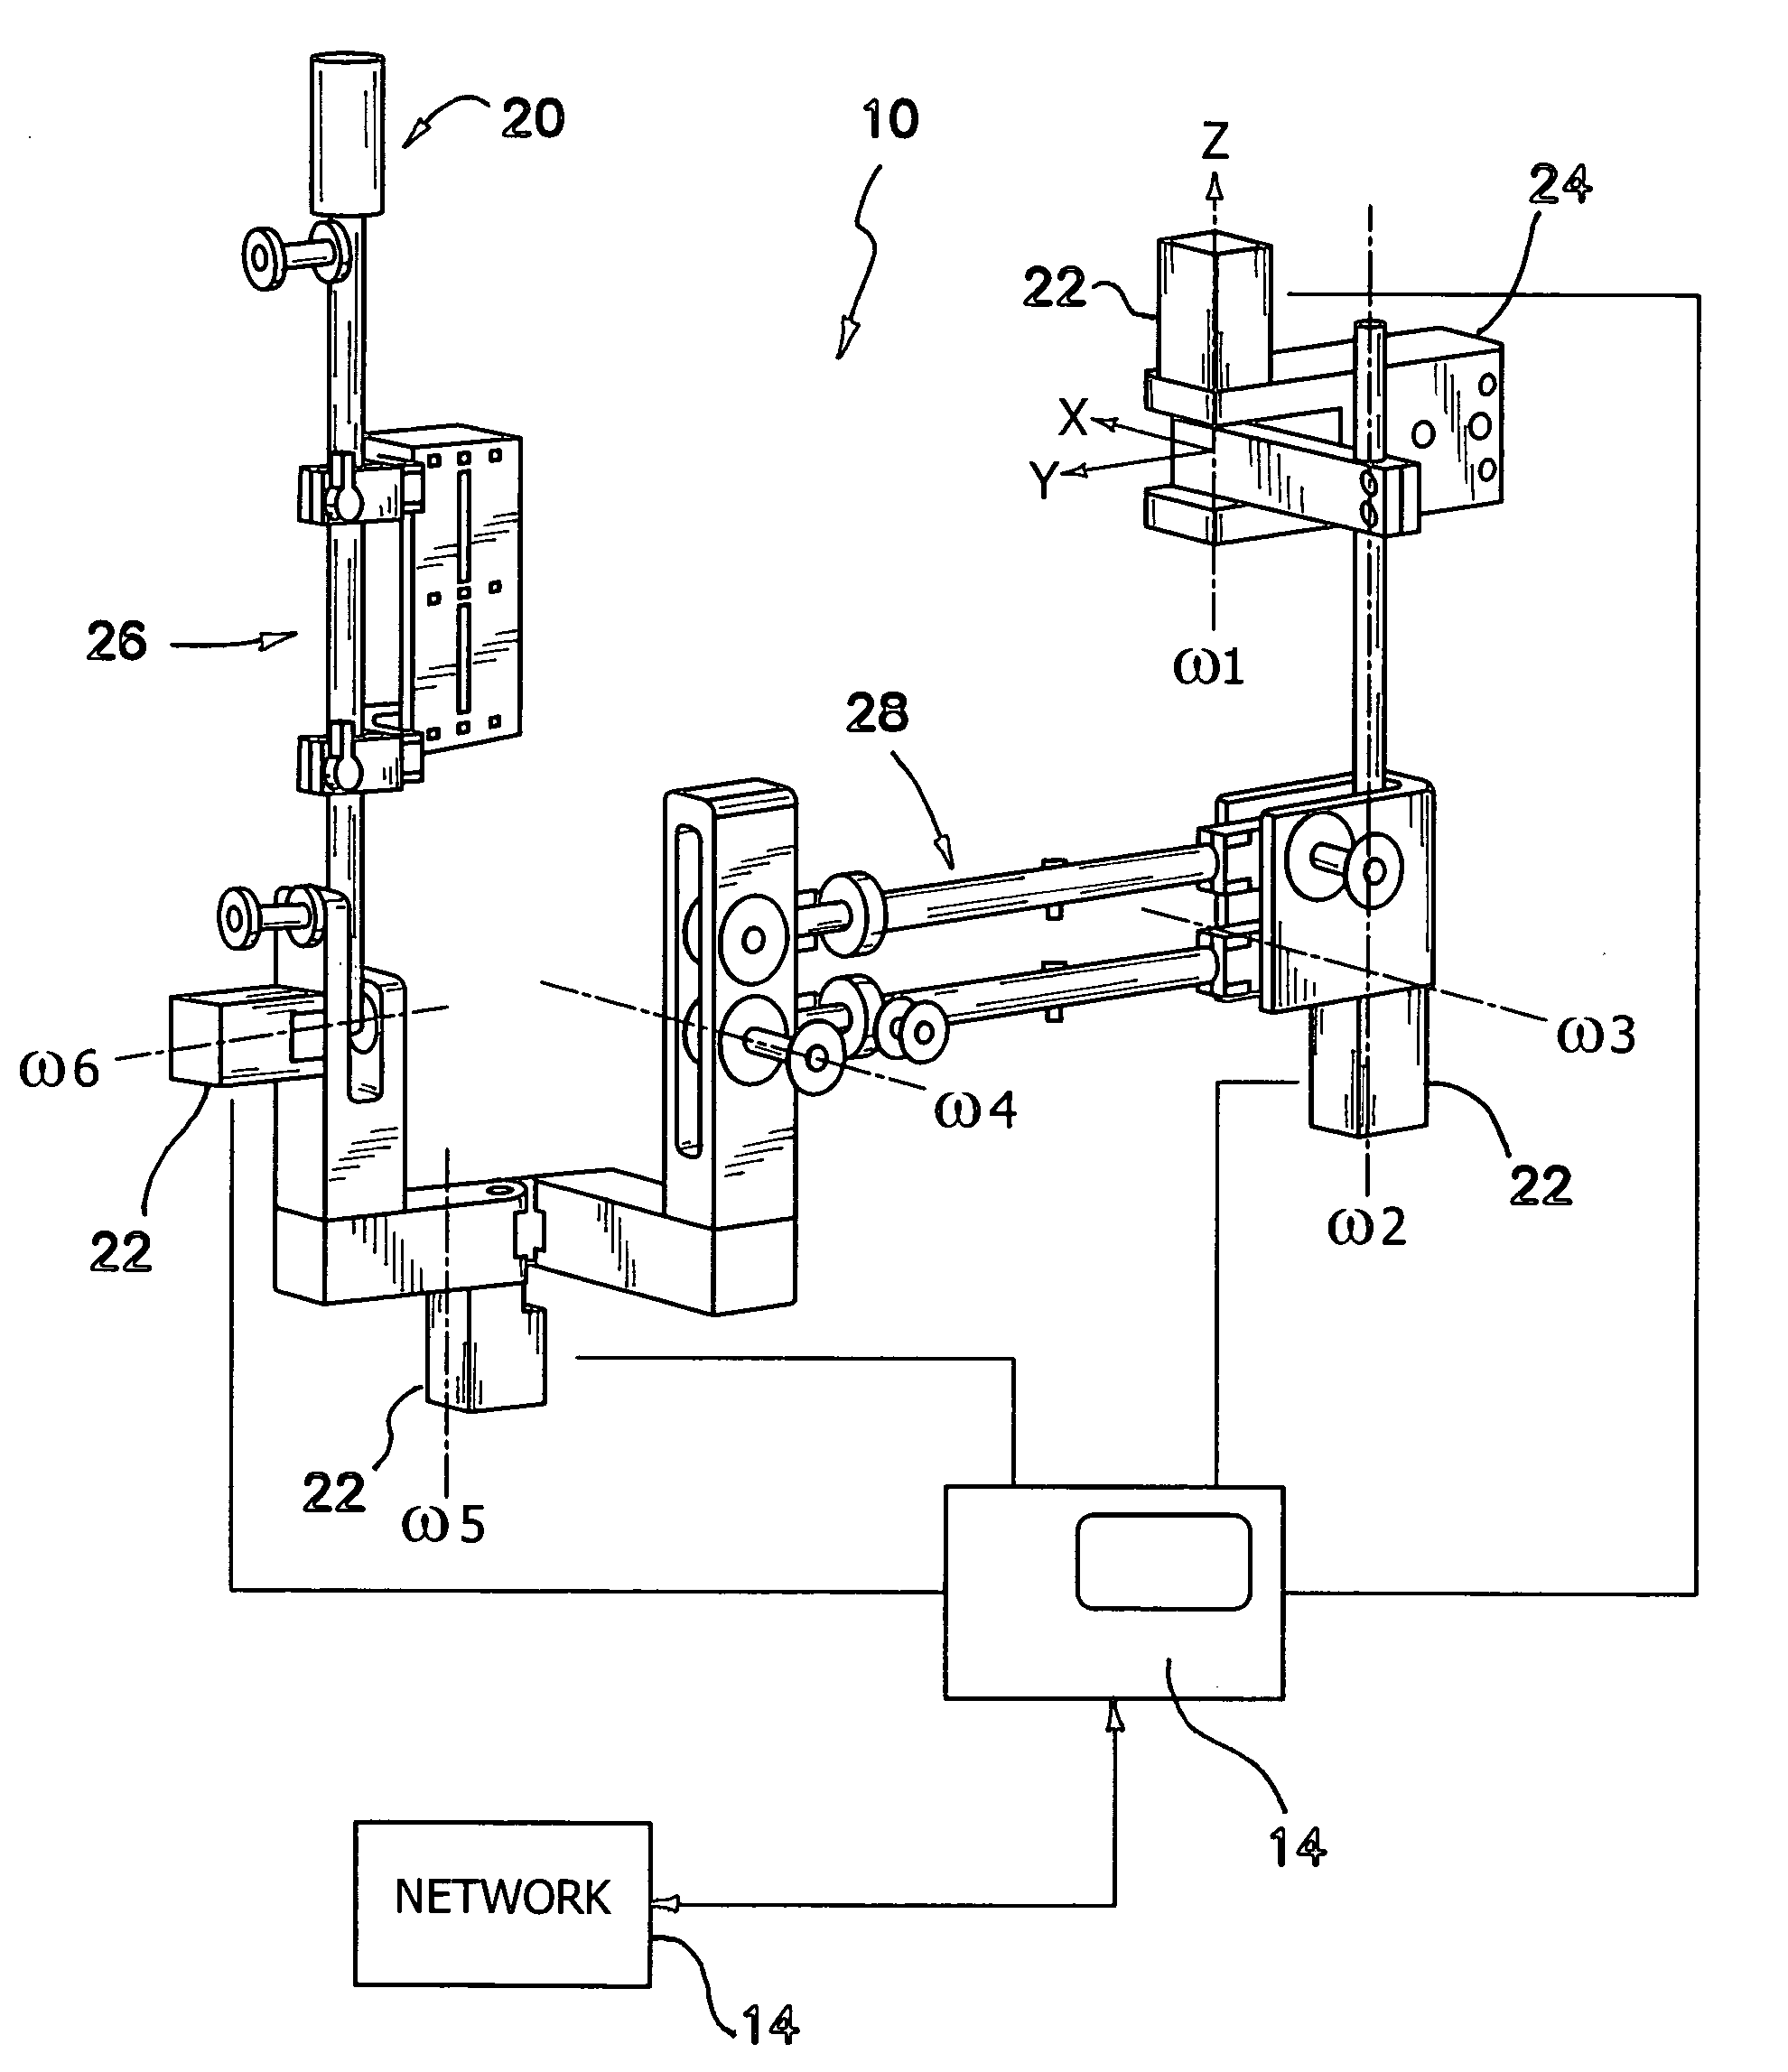 Method and apparatus for automating arm and grasping movement training for rehabilitation of patients with motor impairment